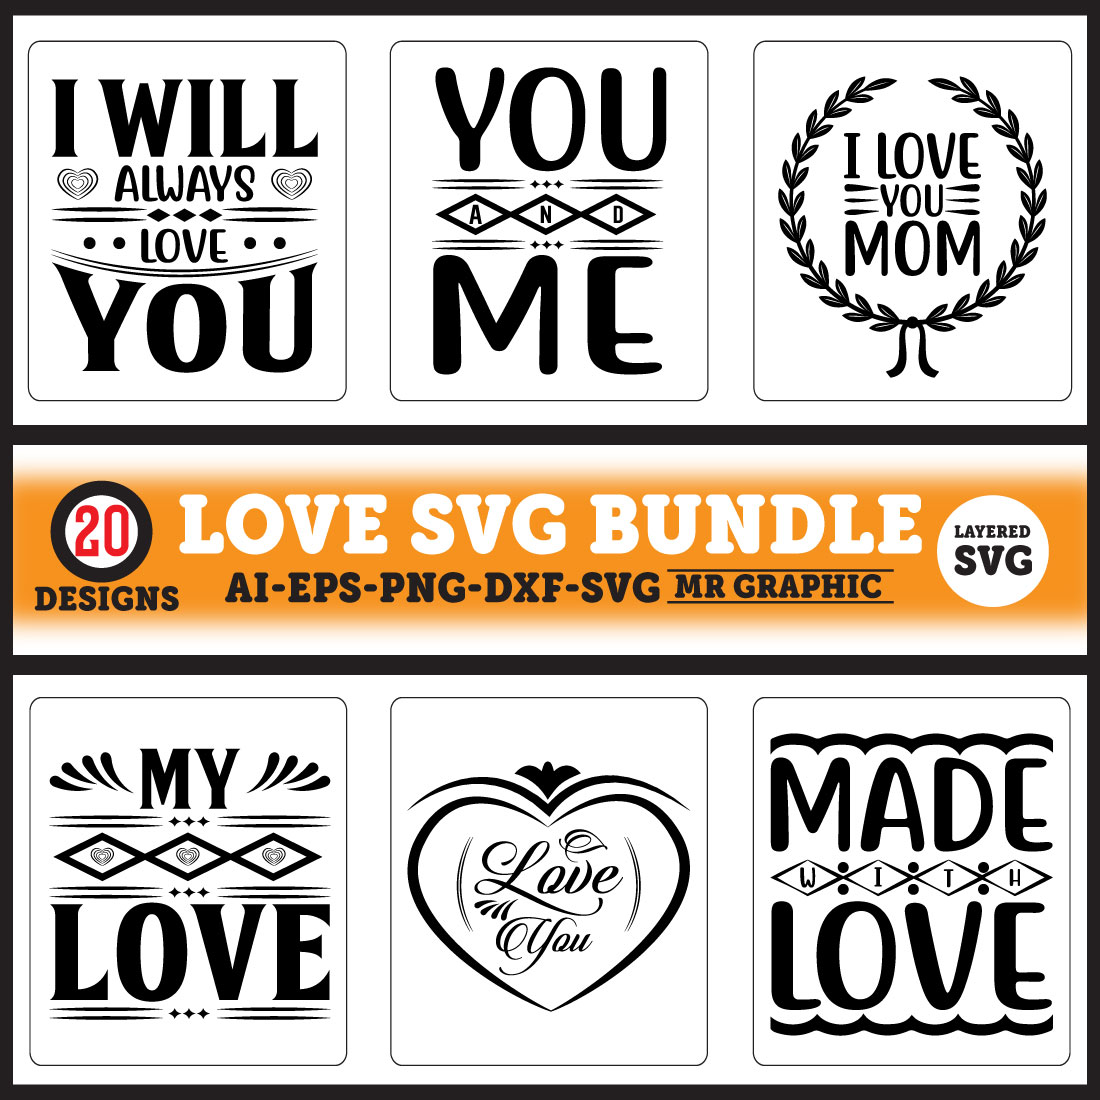 Bundle of amazing images for prints on the theme of love